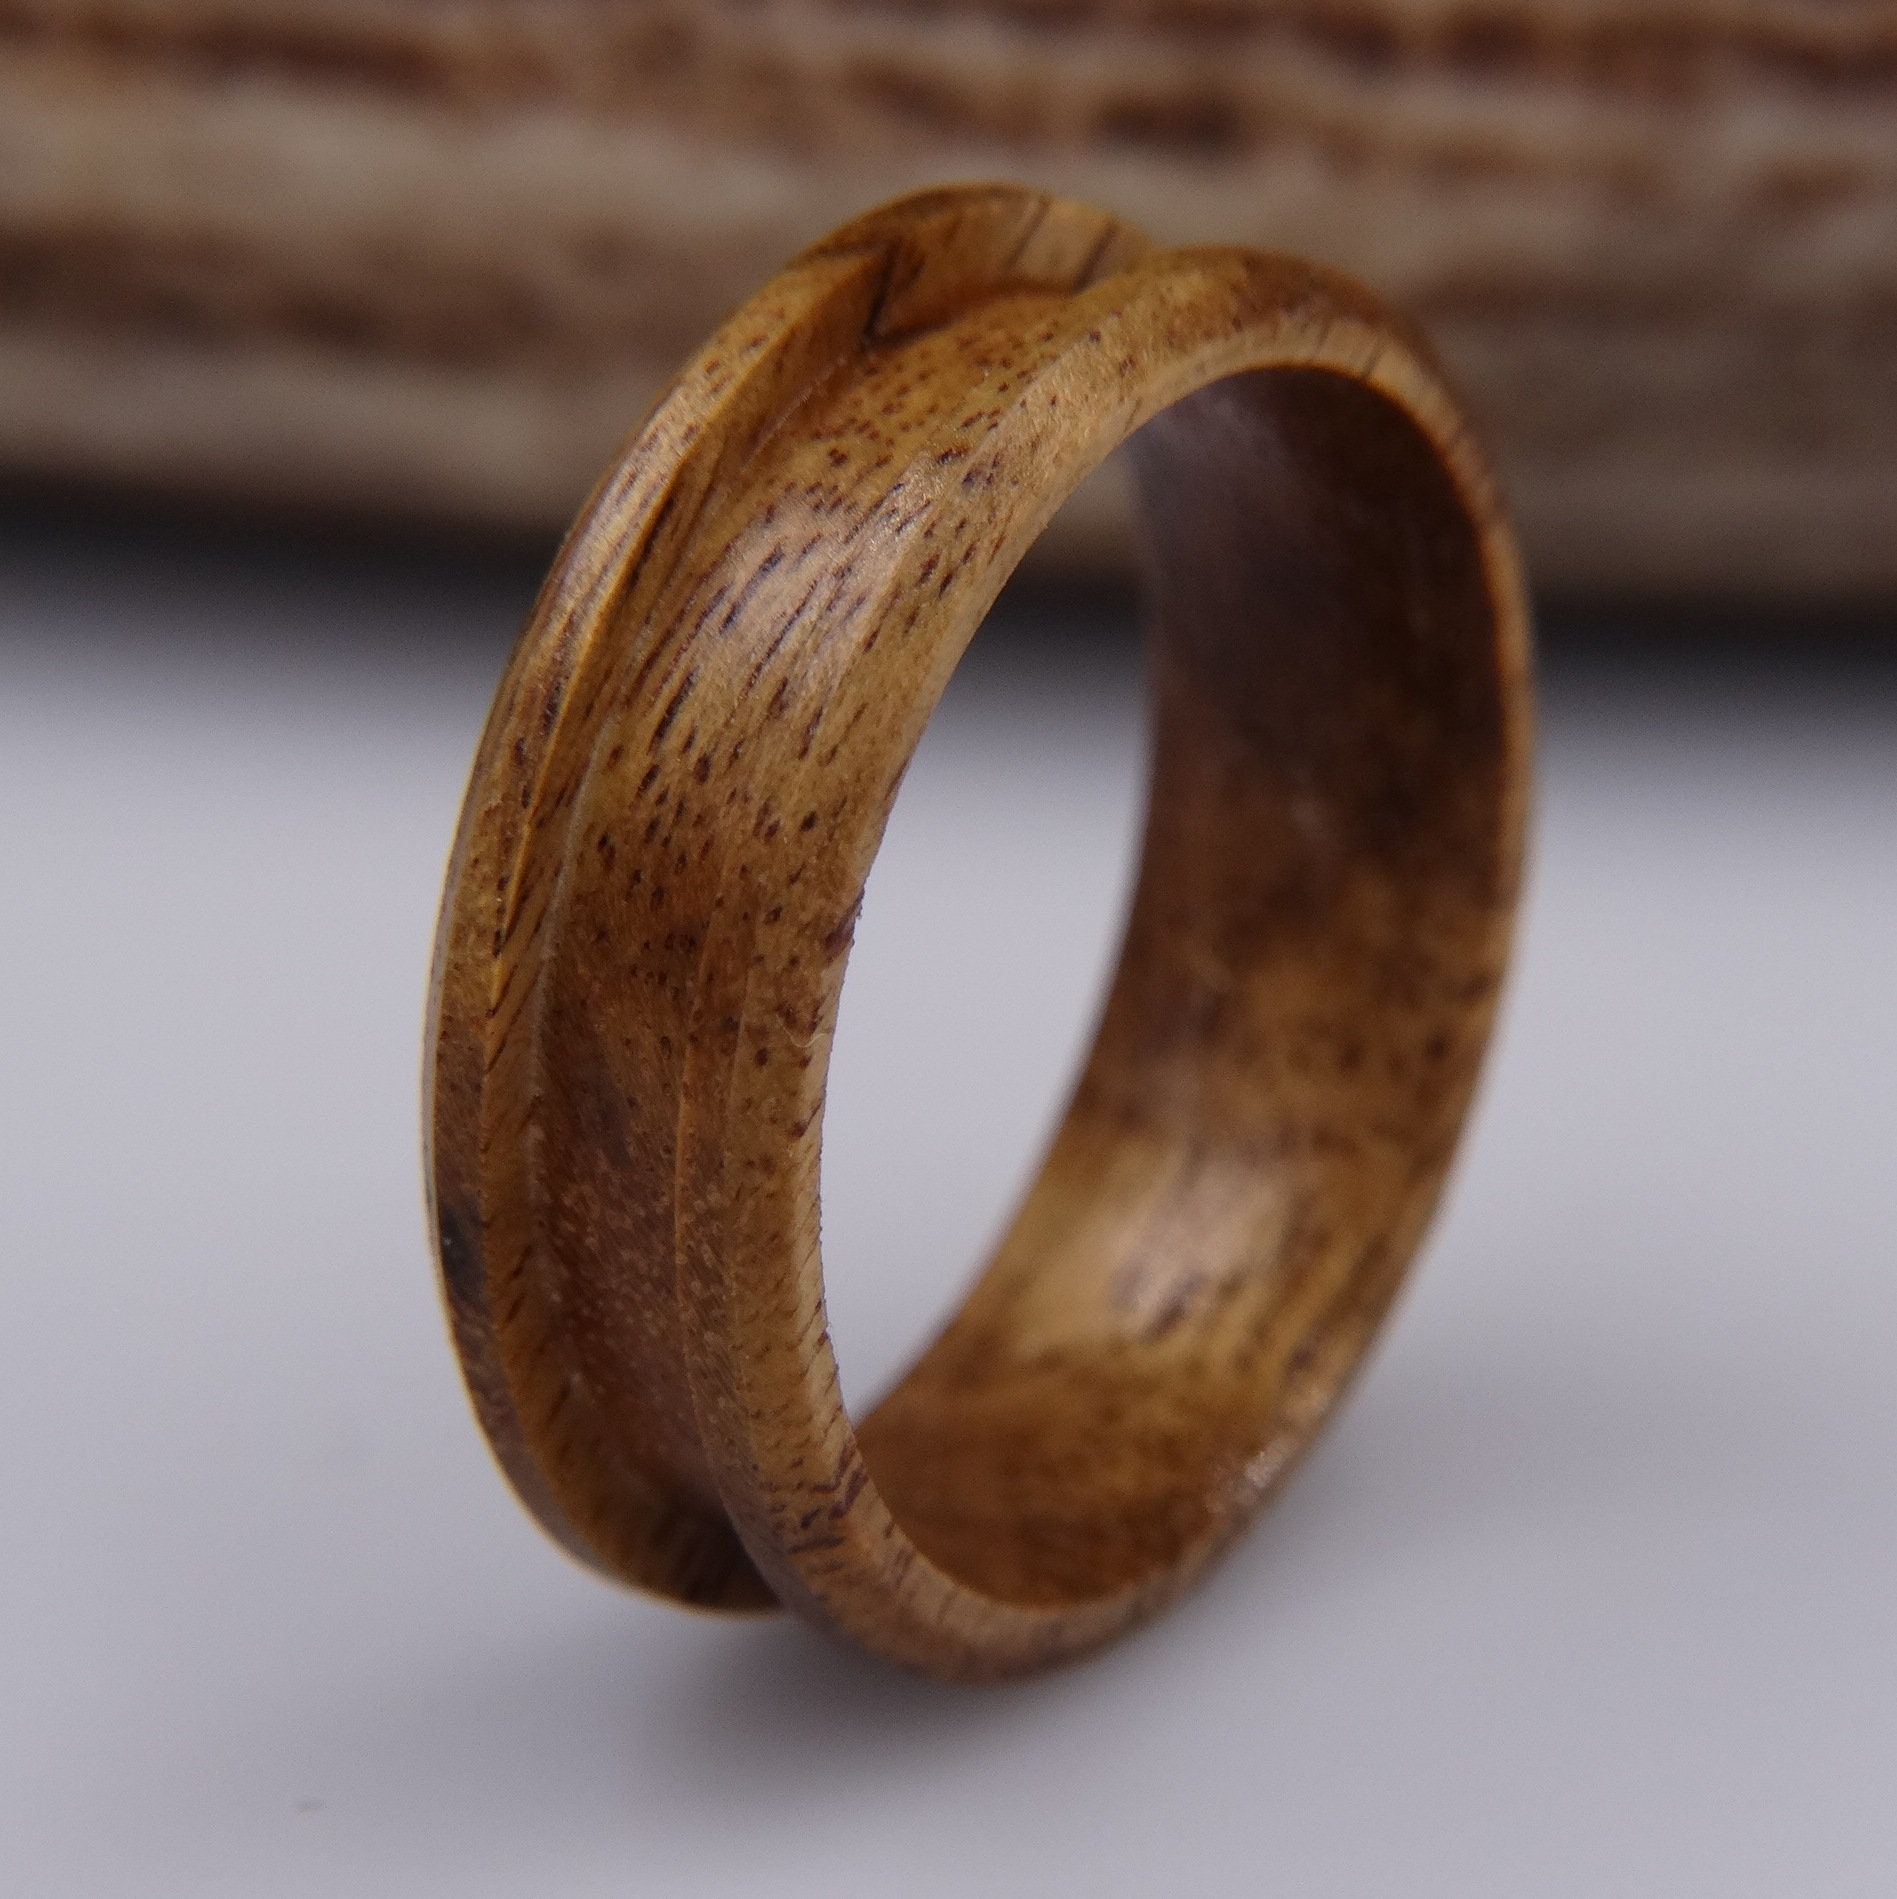 100PCS Natural Wooden Craft Rings 70mm/2.75inch Unfinished Wood Loop Circle  Pendant Connectors Jewelry Making Accessory